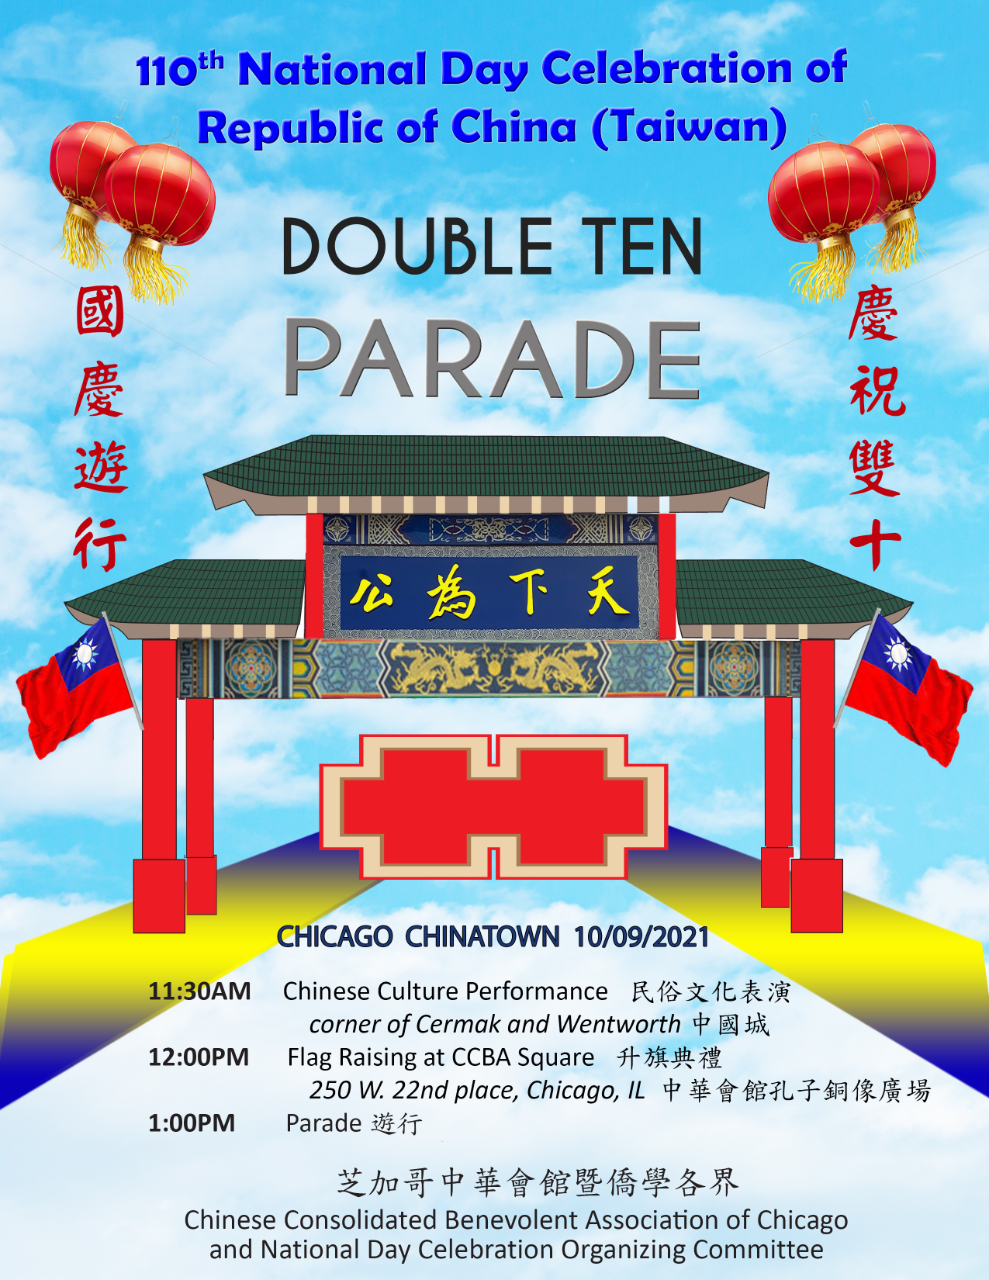 On October 9th, let’s join the Double Ten Parade in celebration of the National Day of the Republic of China(Taiwan) at Chicago Chinatown. Looking forward to seeing you there.